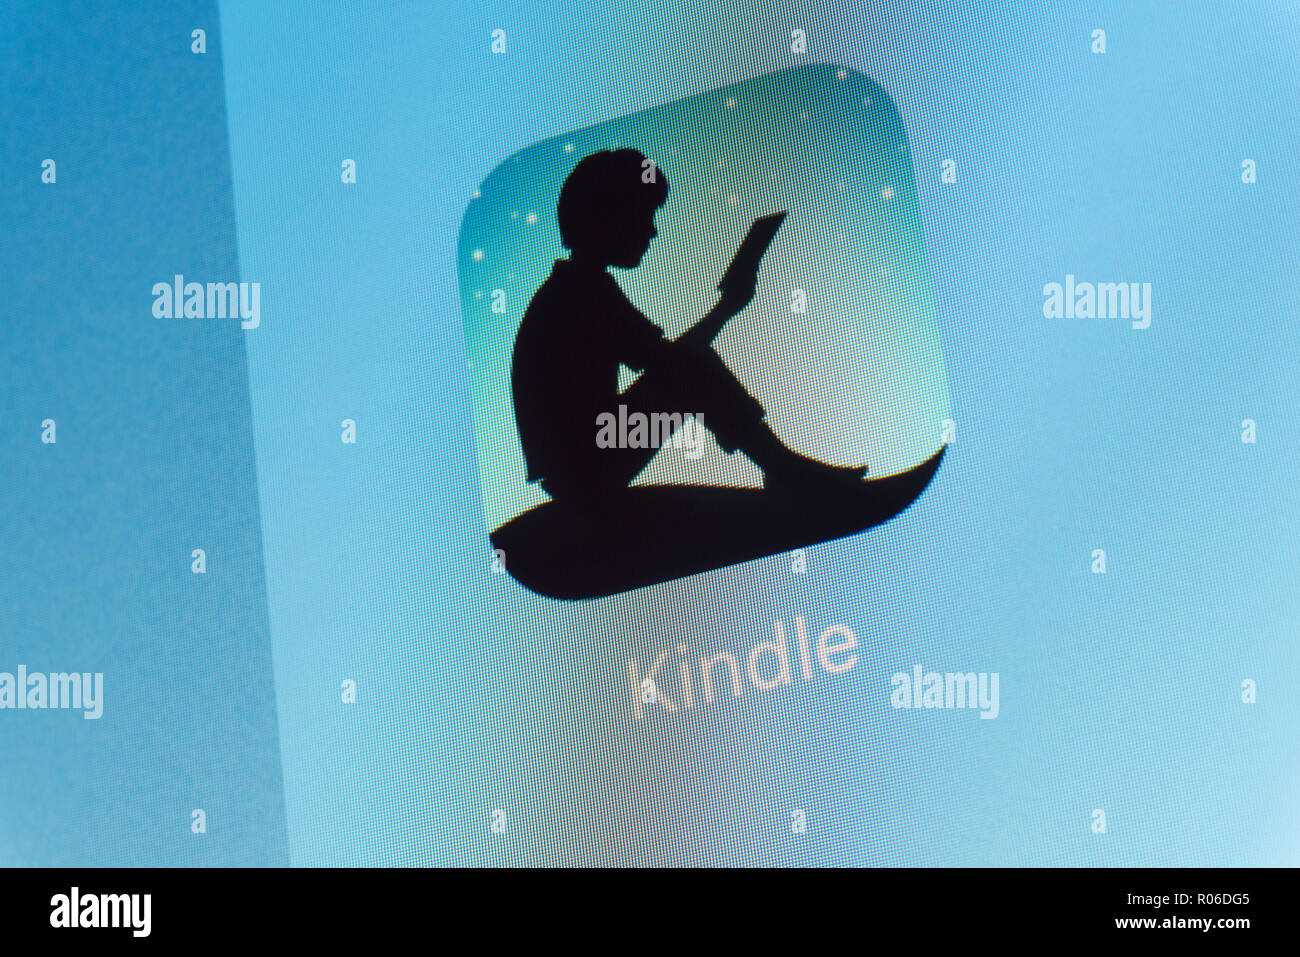 Kindle App on cellphone screen Stock Photo